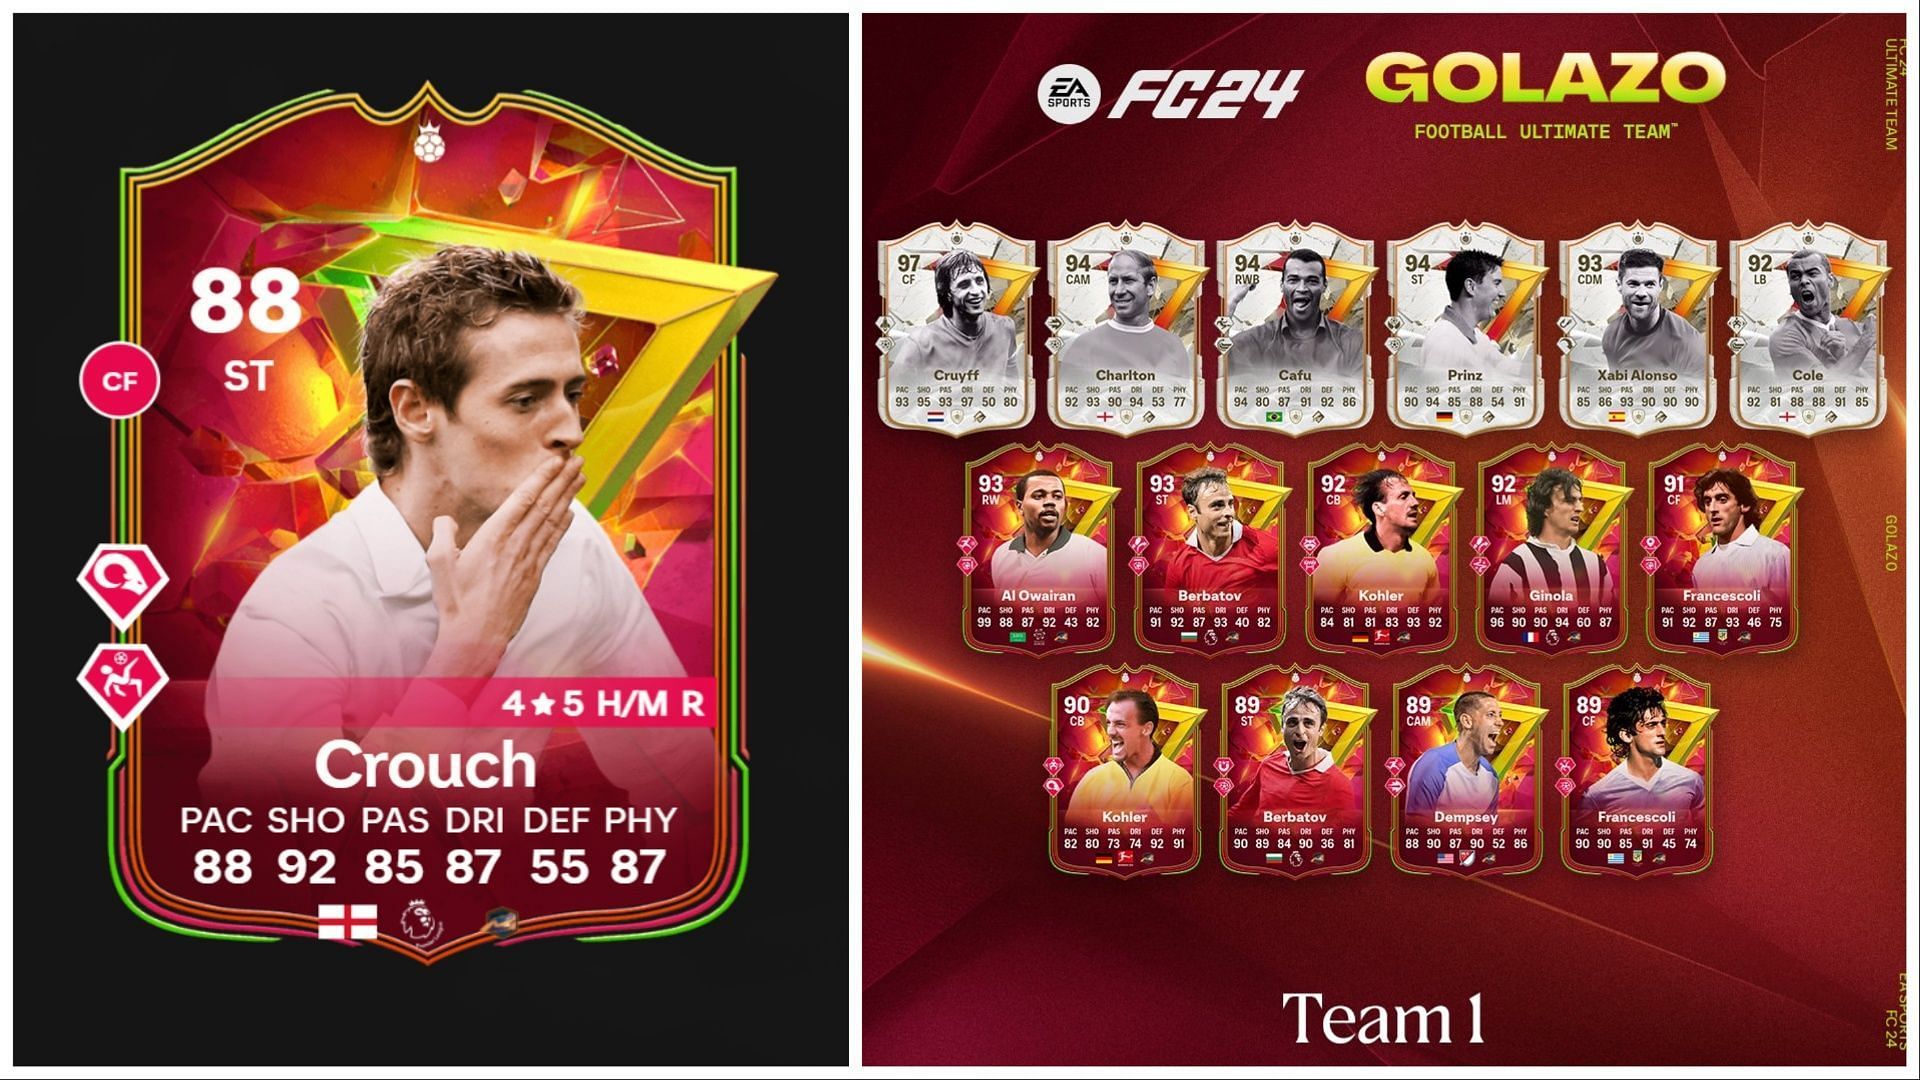 The EA FC 24 Golazo Extravaganza Cup objective is now live